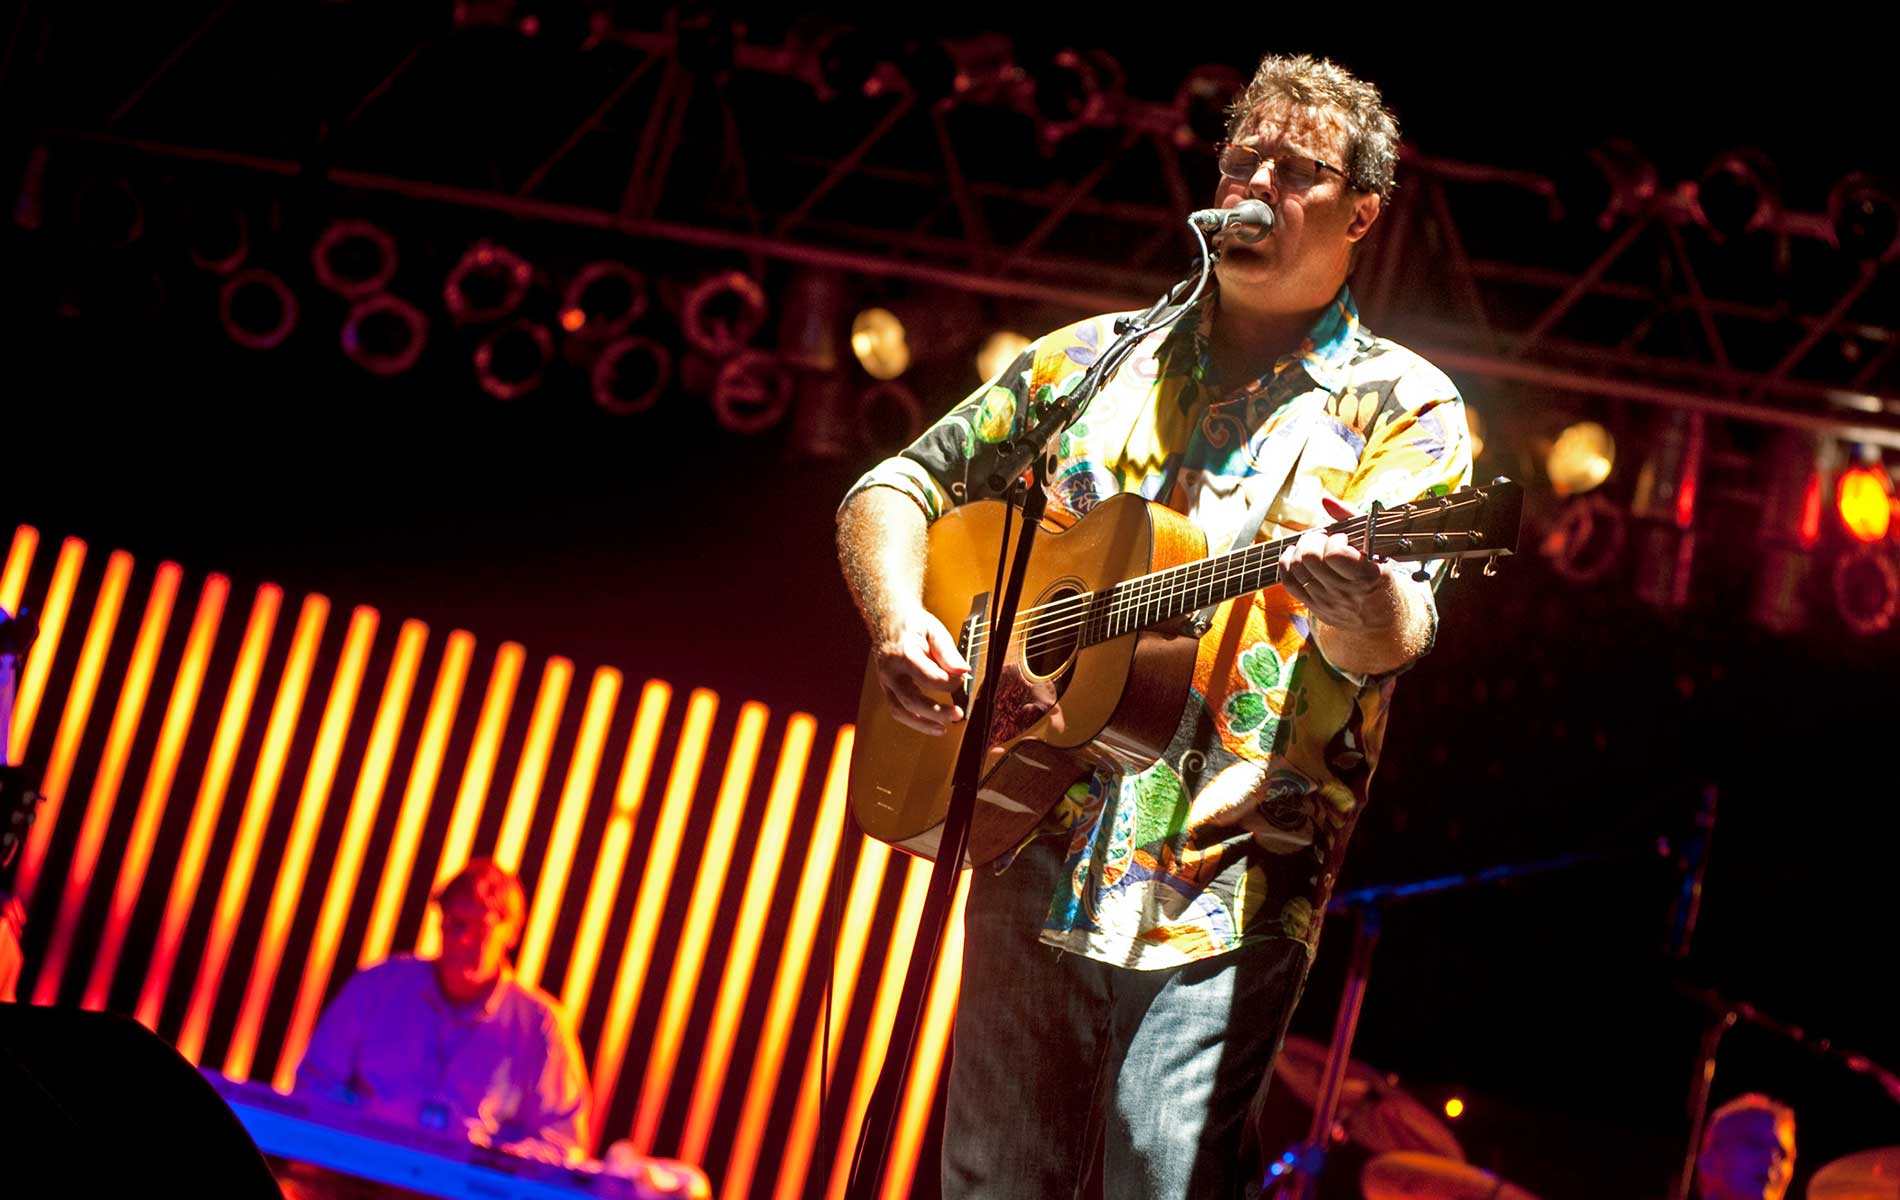 Vince Gill “Back to the Beach” Concert